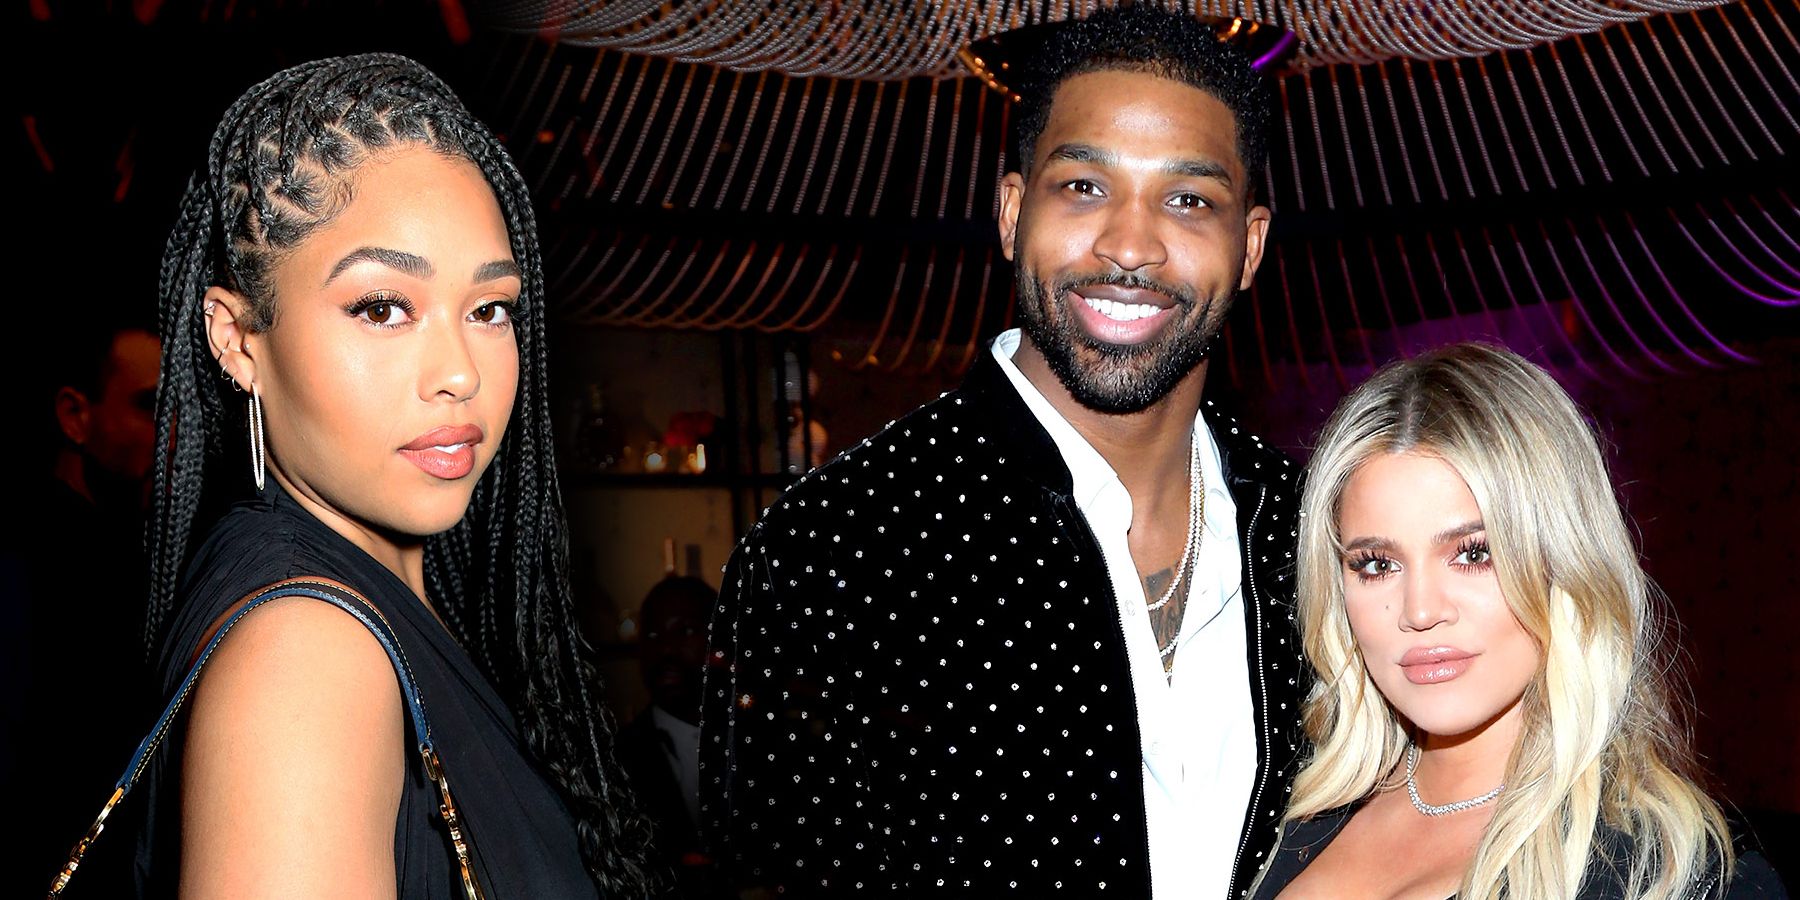 KUWTK Jordyn Woods Appears to Reference Tristan Scandal on MTV’s Cribs